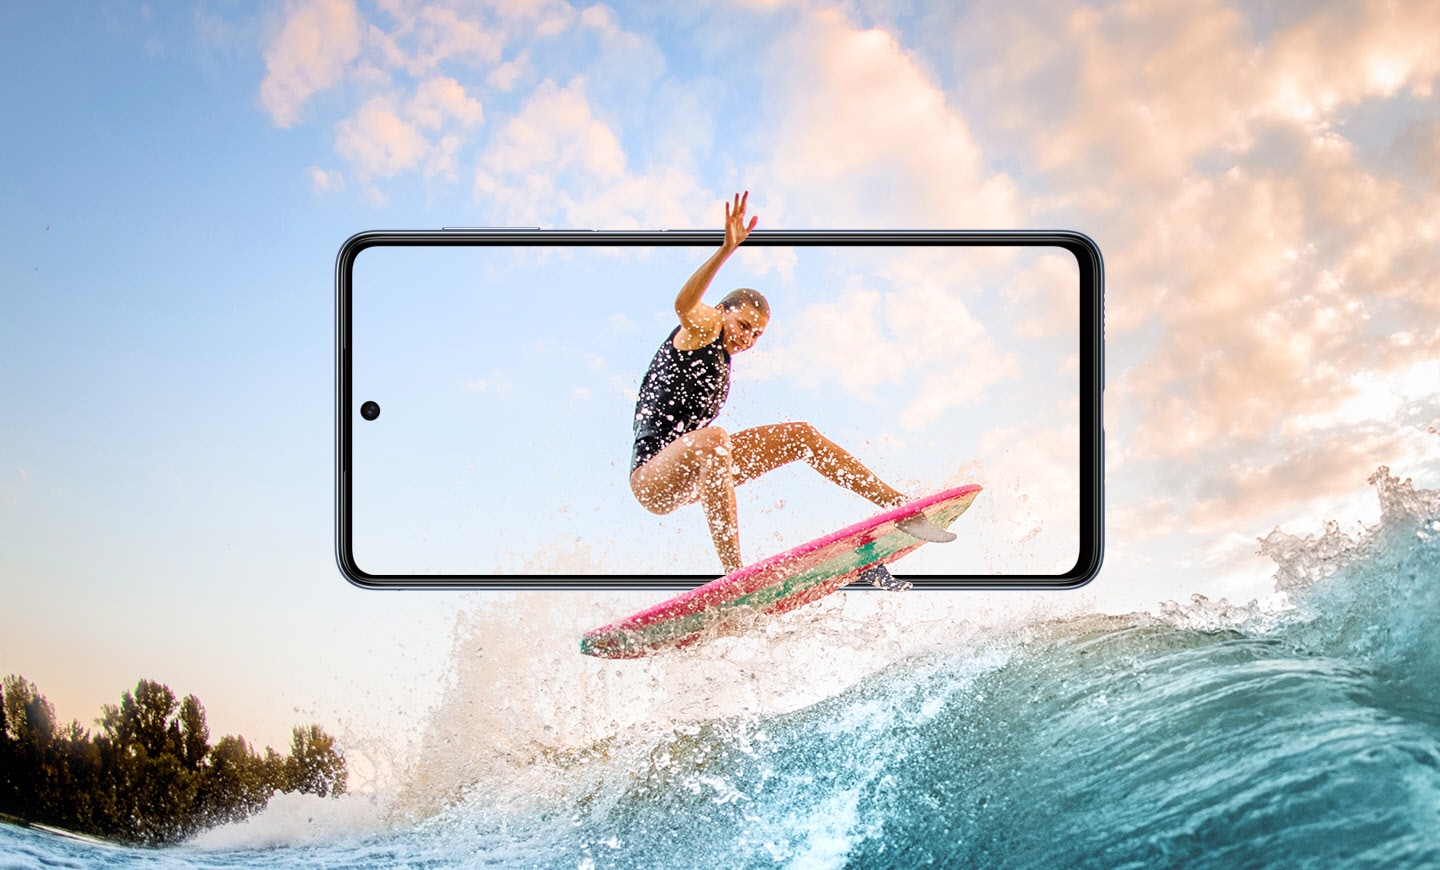 A Galaxy M53 5G Super AMOLED FHD is horizontal facing forward in the center. Onscreen is a woman surfing. Her board and right hand extend beyond the frame of the display, and around it is a scene of waves and blue sky with pink clouds.